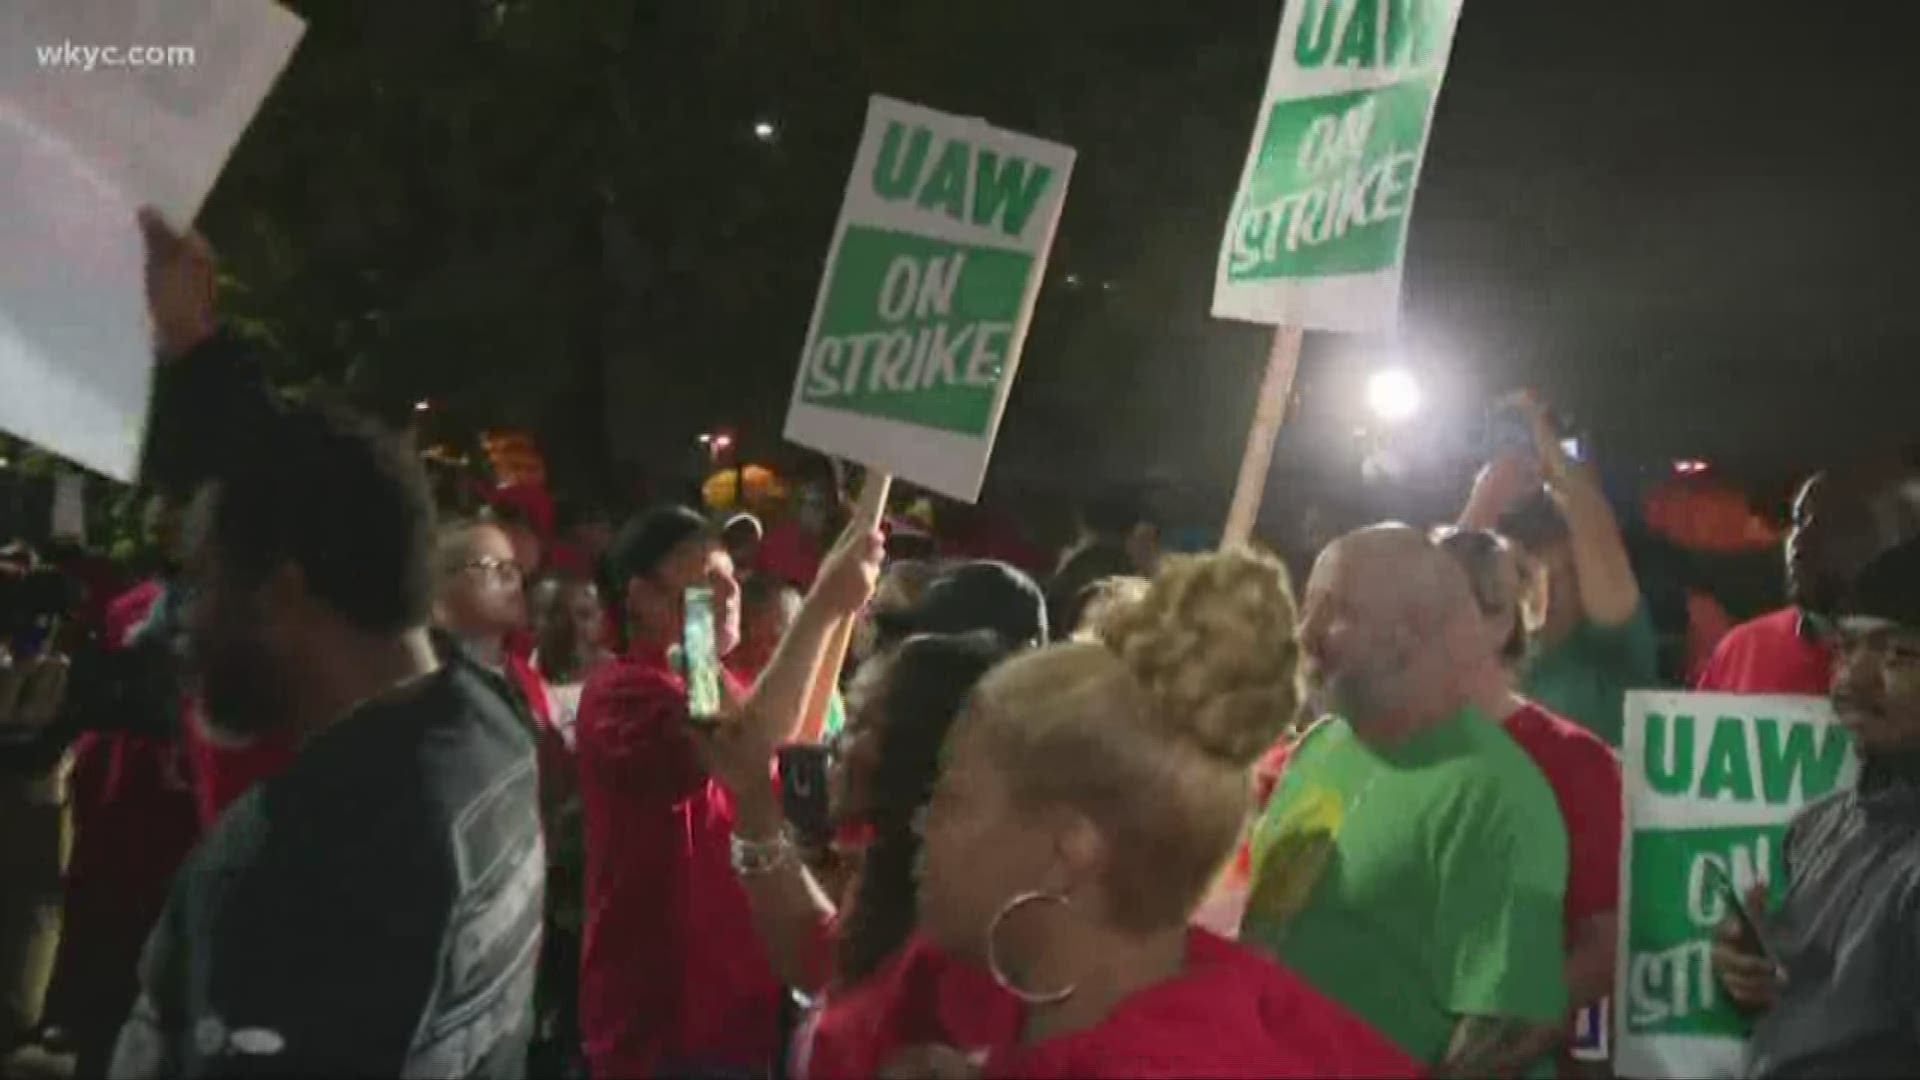 Sept. 16, 2019: More than 49,000 workers shut down 33 manufacturing plants in nine states across the U.S., as well as 22 parts distribution warehouses. It wasn't clear how long the walkout would last, with the union saying GM has budged little in months of talks while GM said it made substantial offers including higher wages and factory investments.